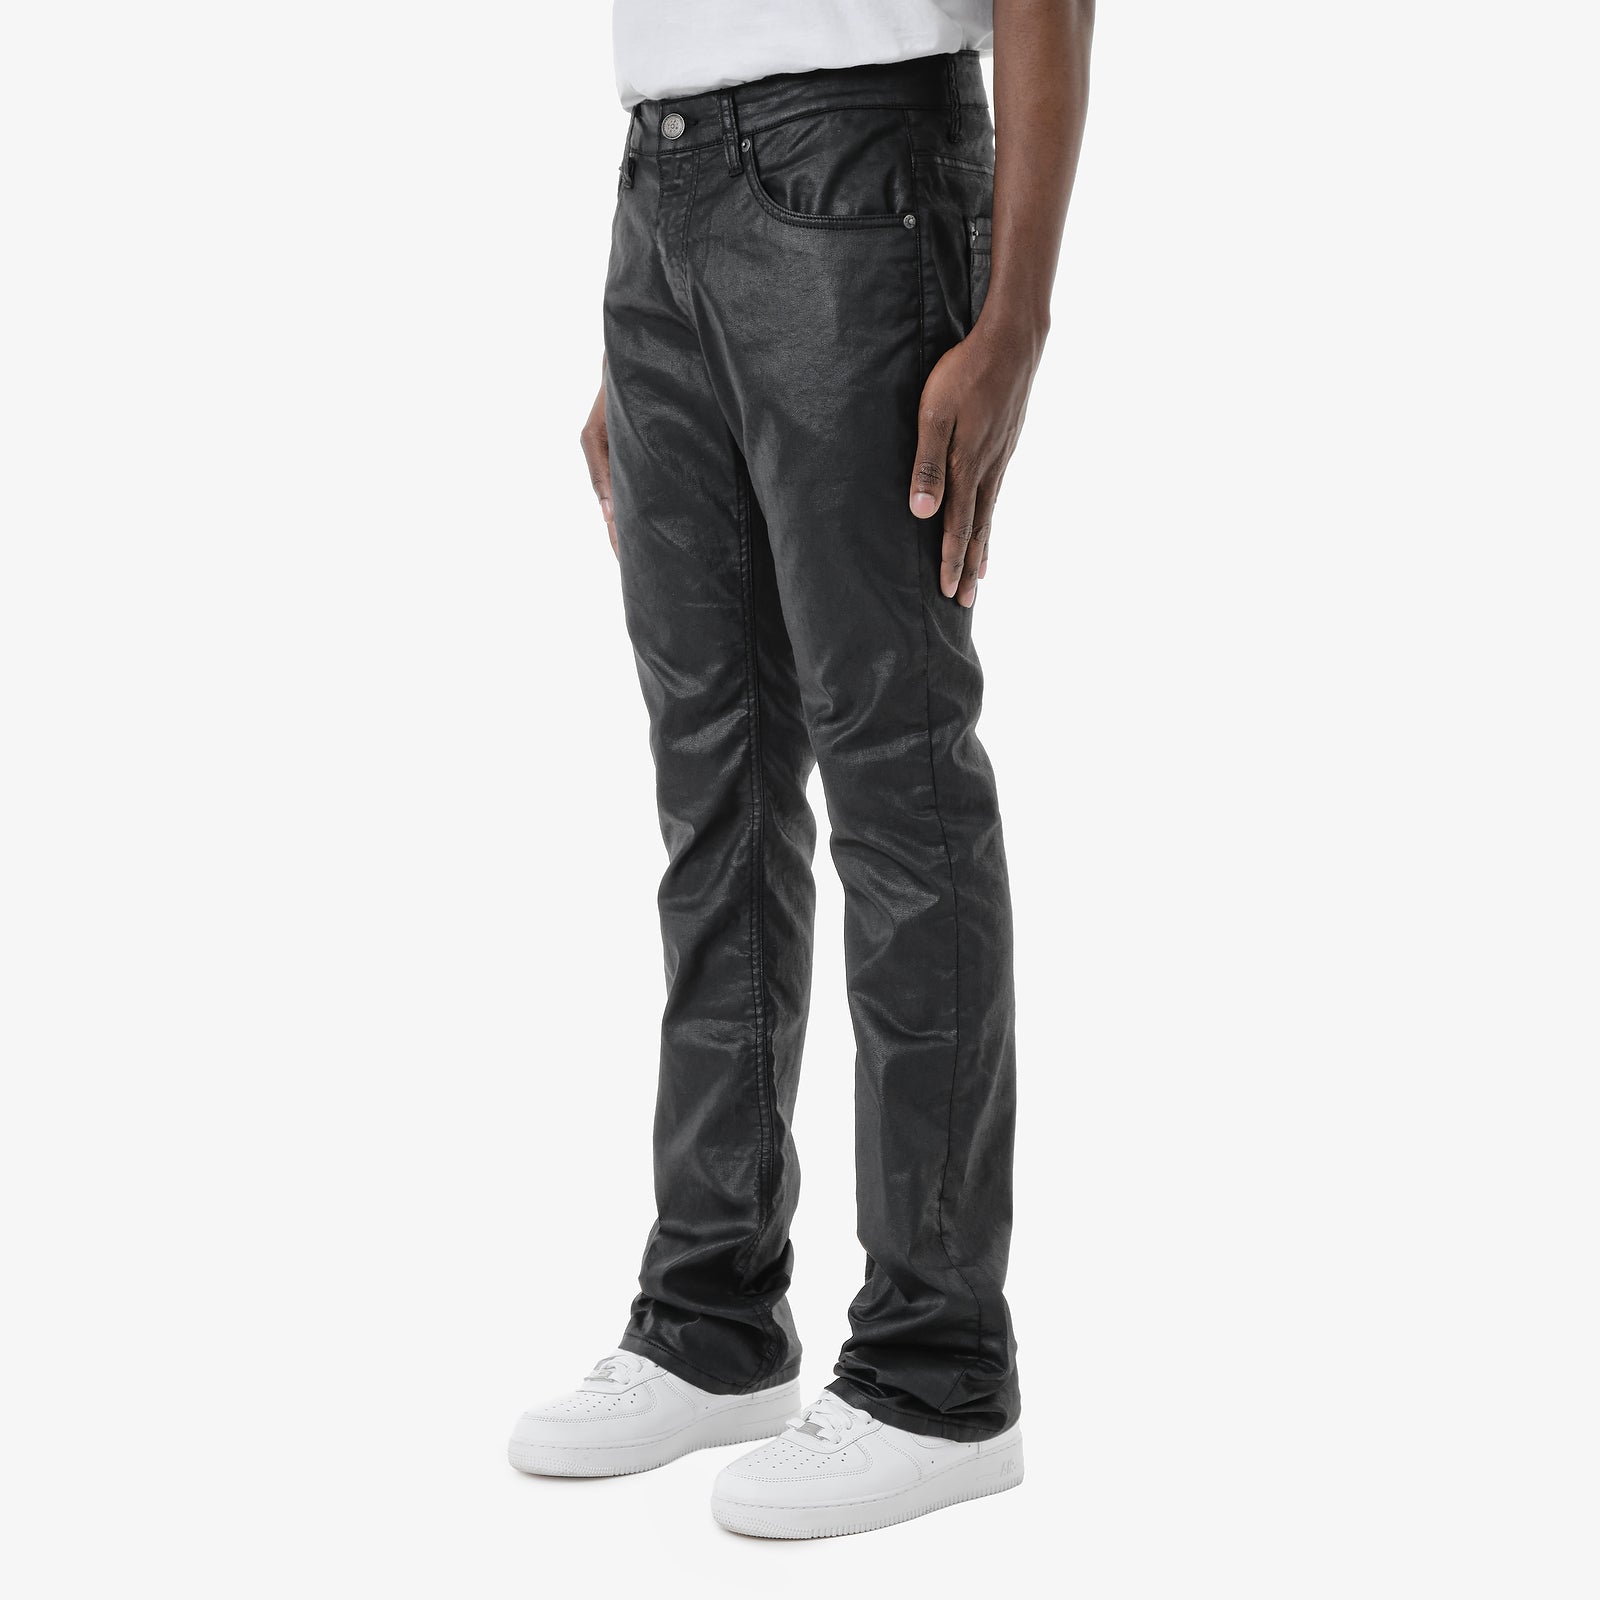 JET BLACK WAXED STACKED PANTS